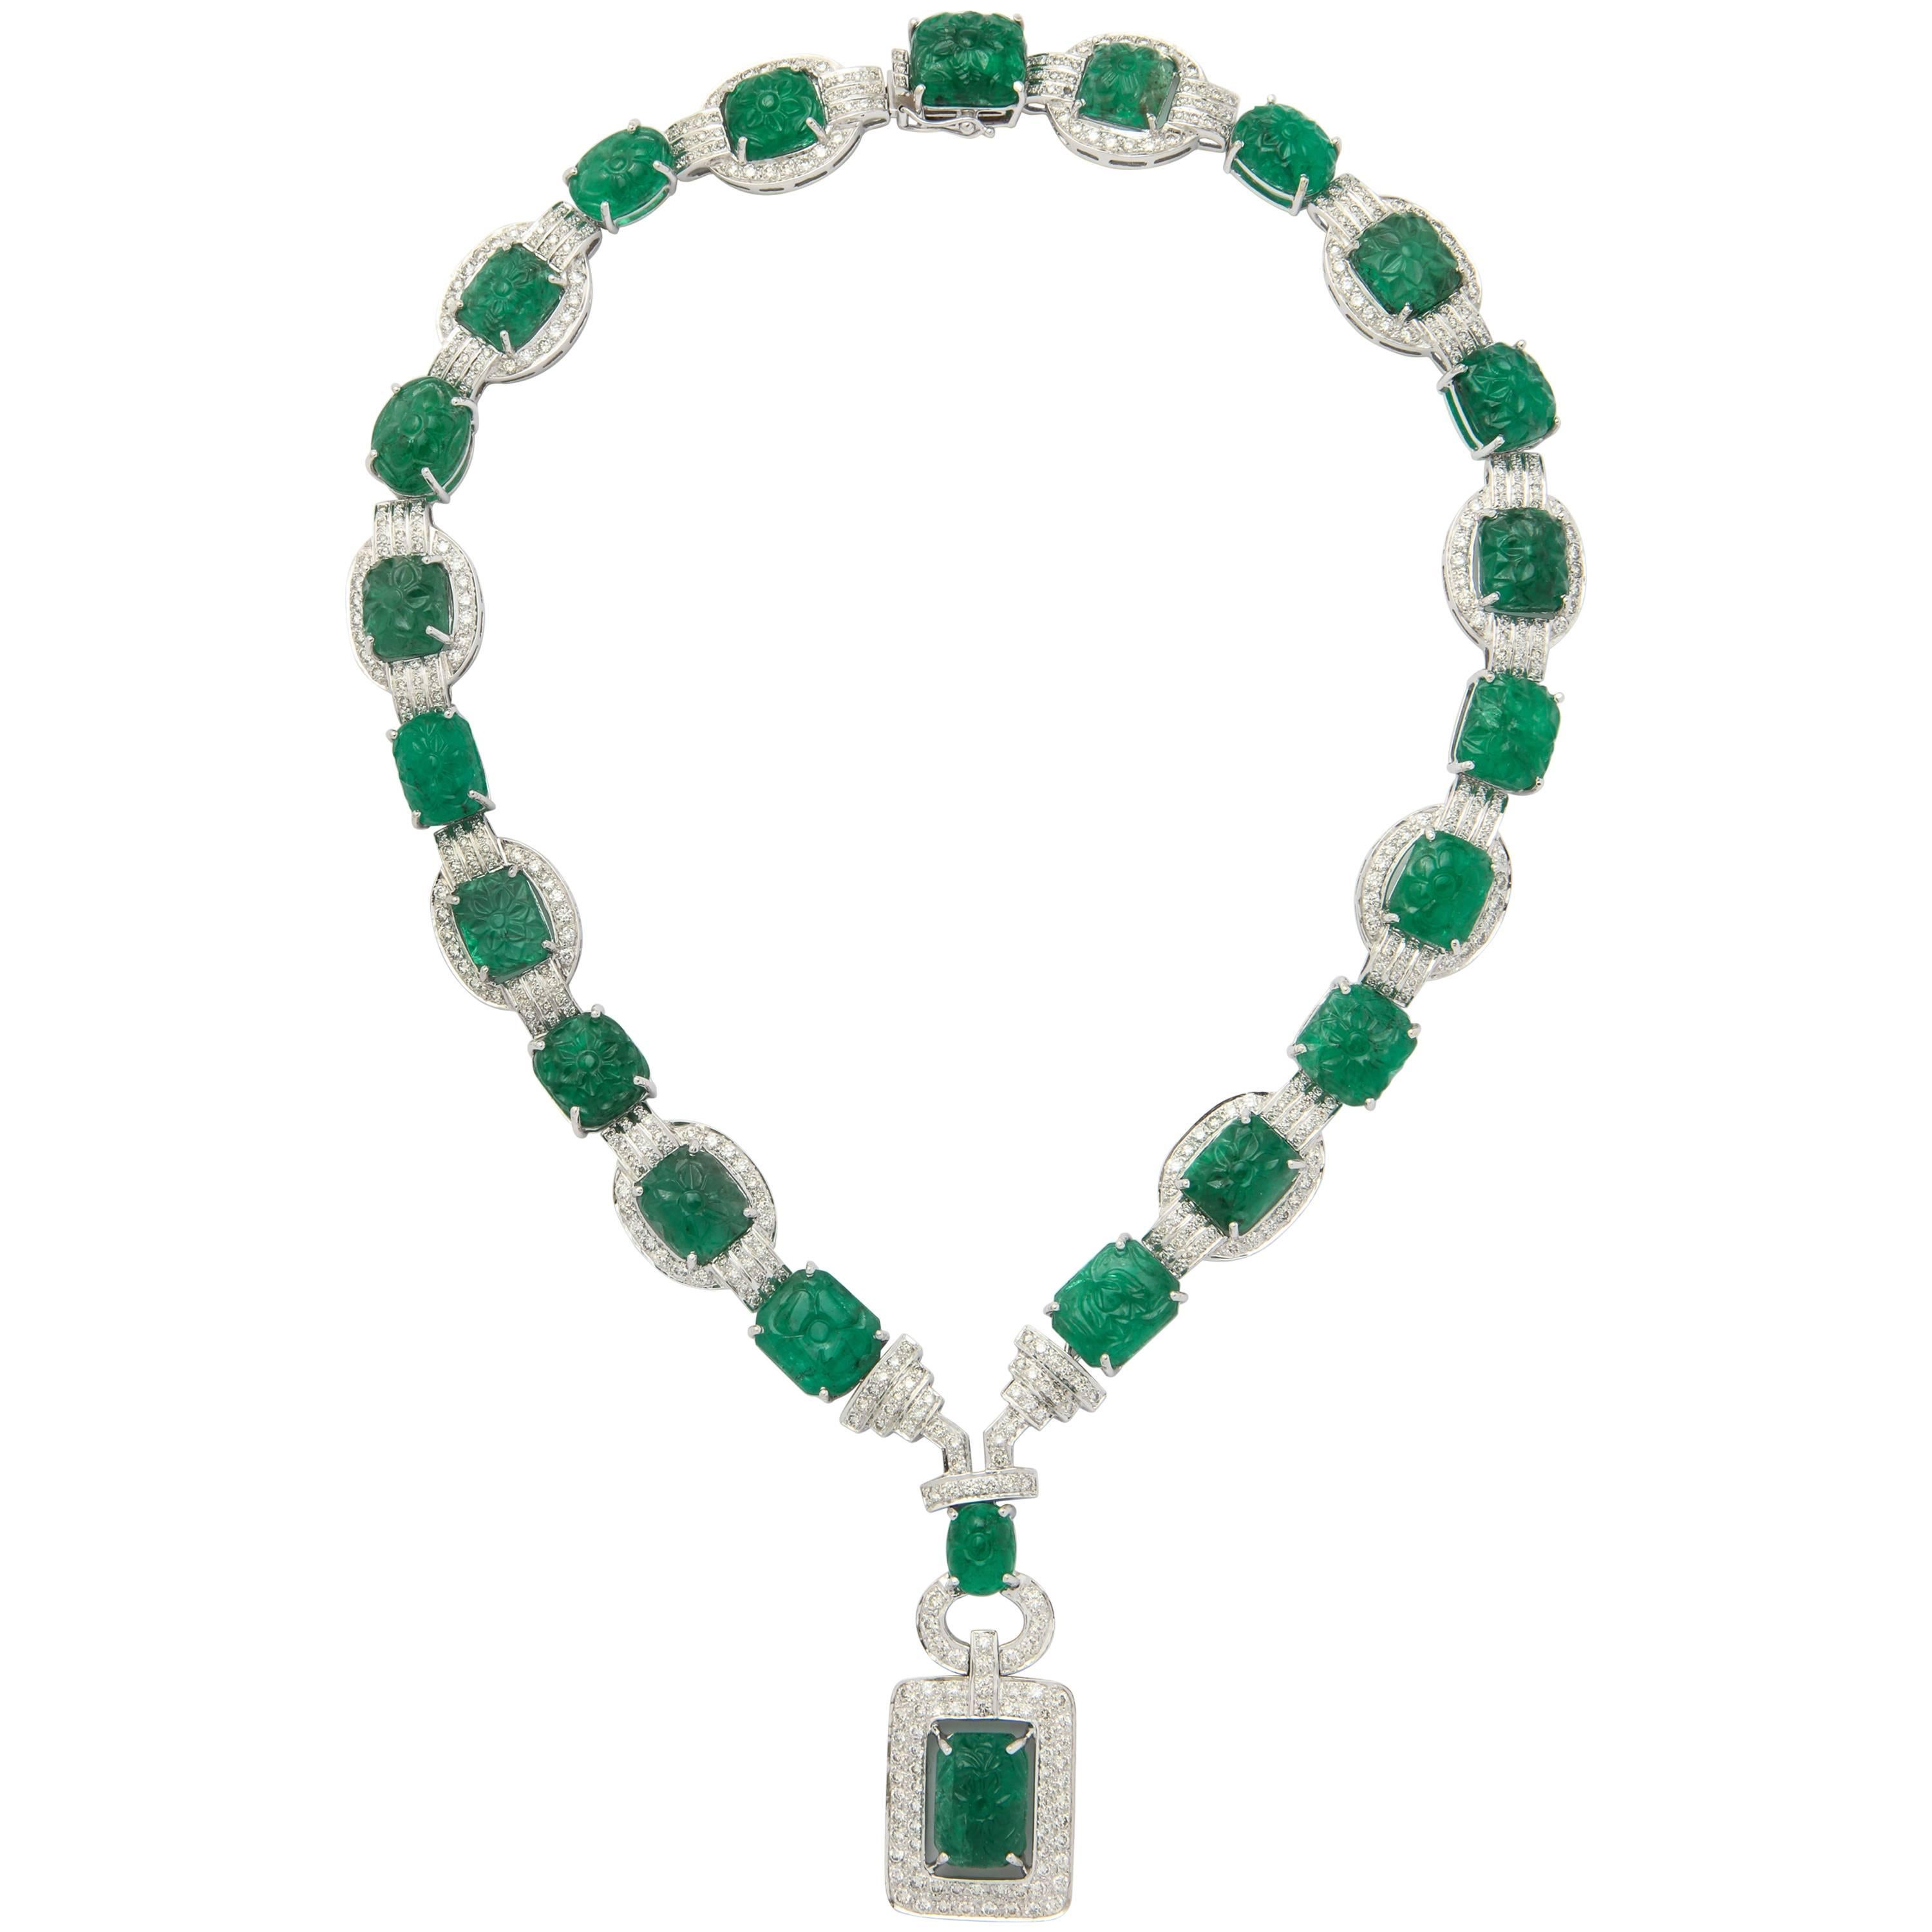 Important Carved Emerald and Diamond Necklace